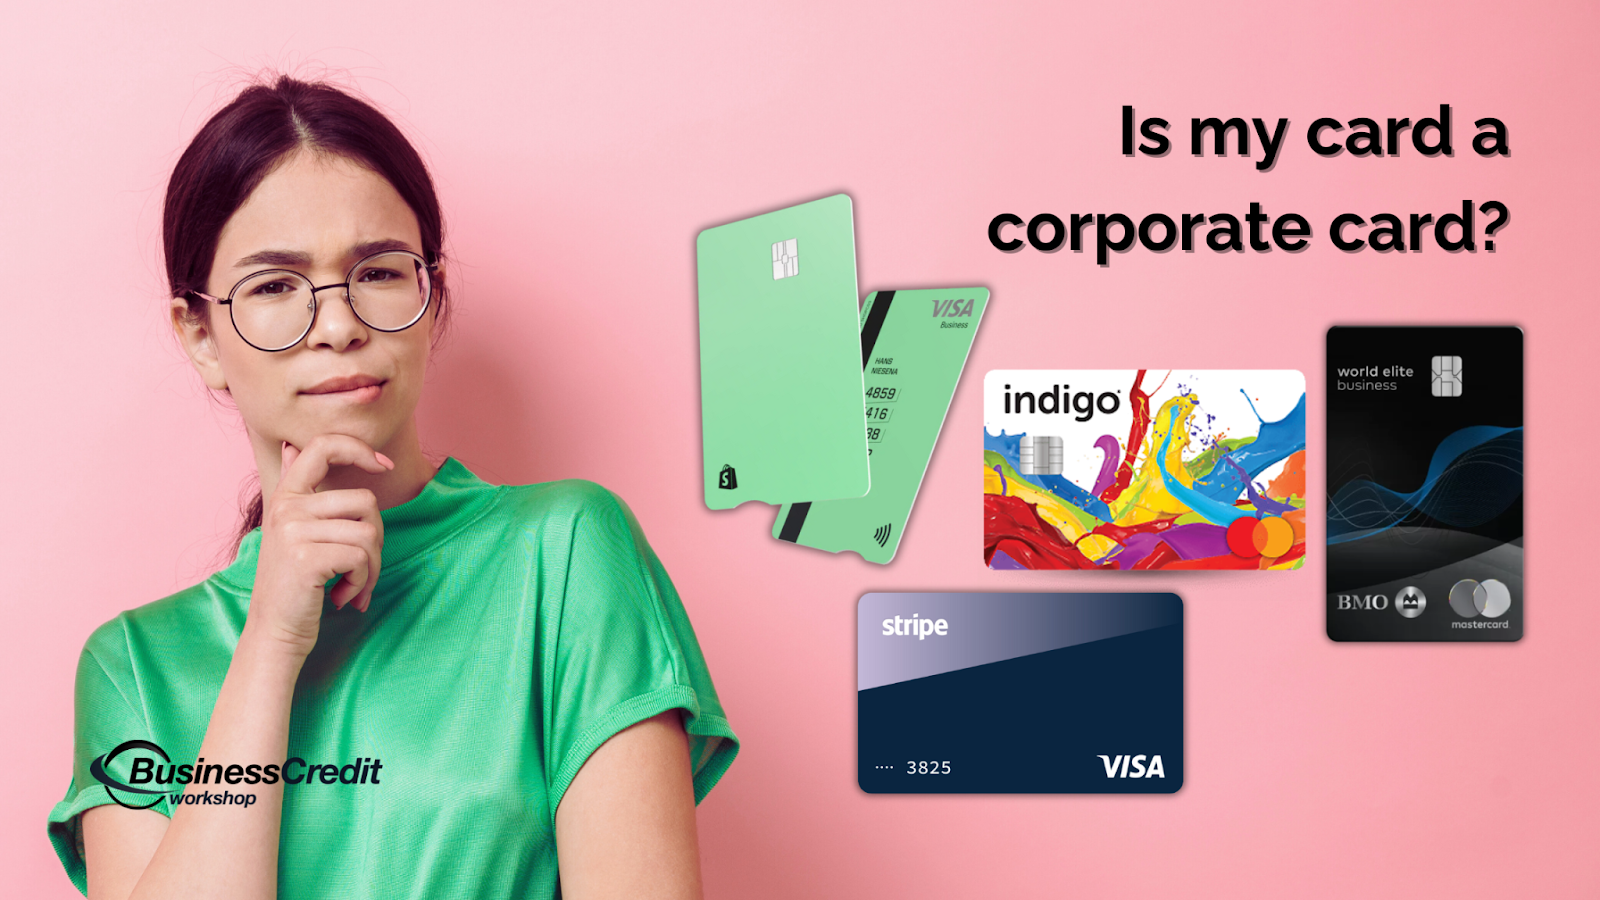 Small business credit vs corporate card